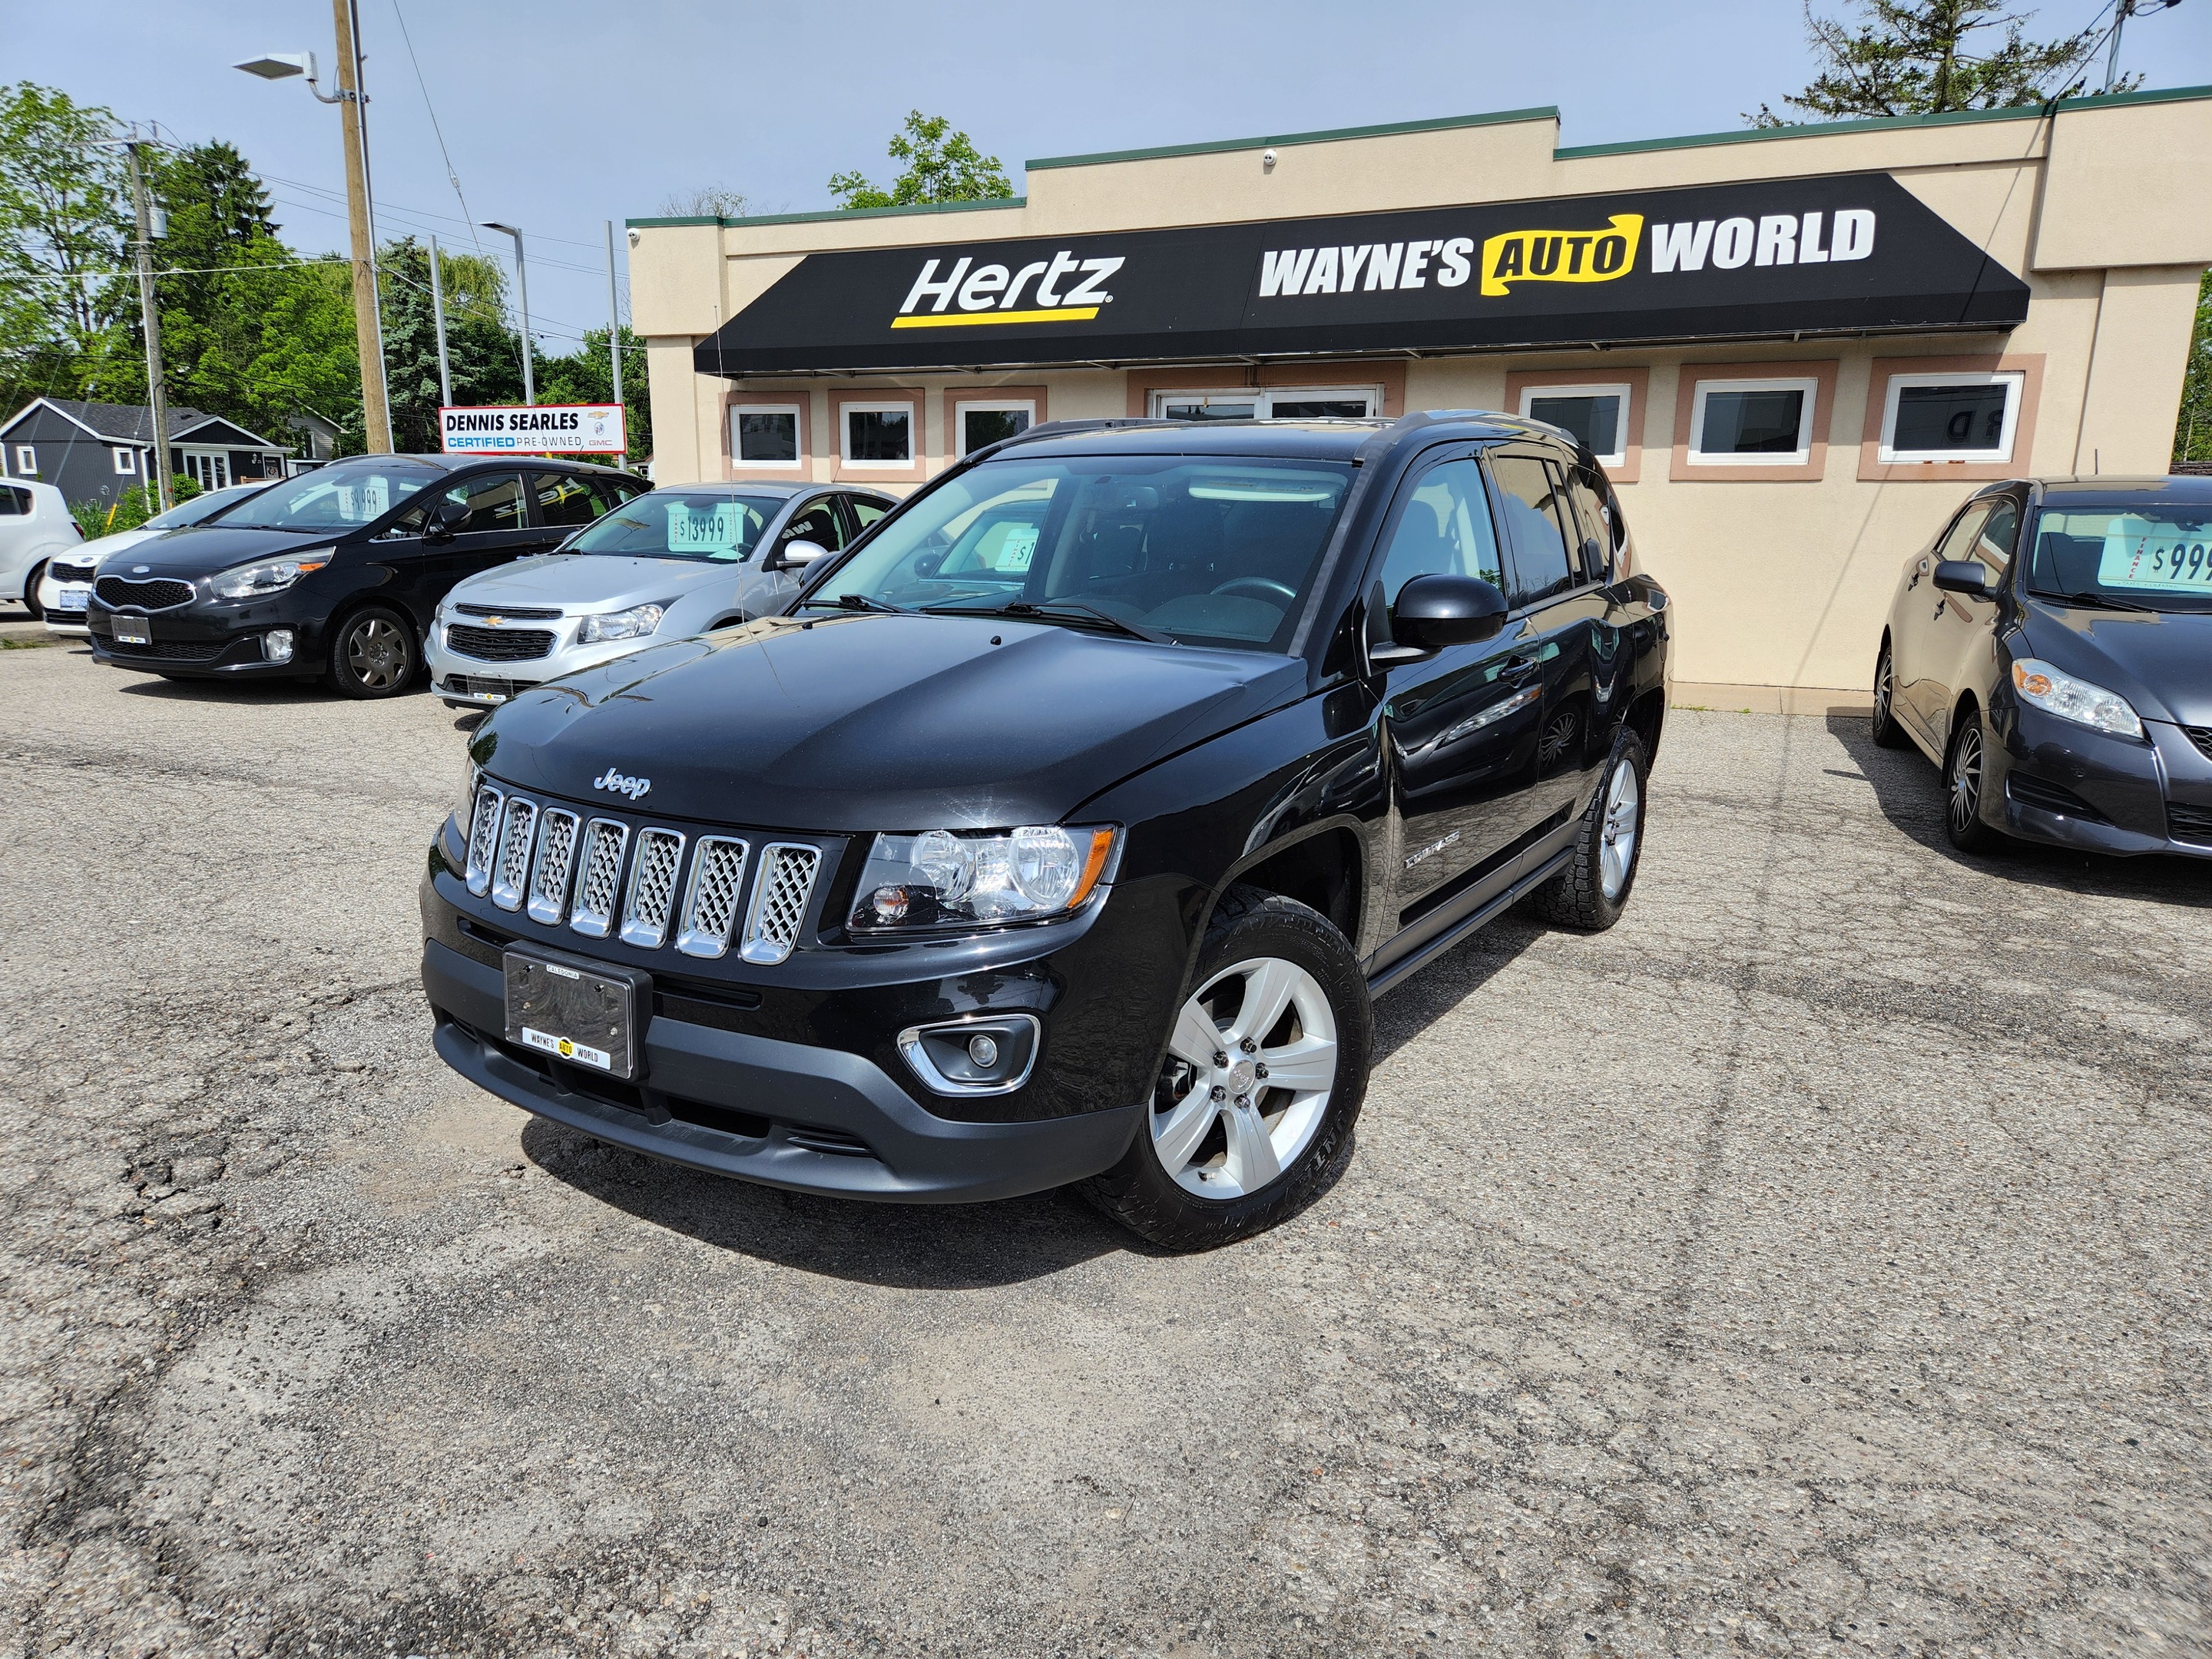 2016 Jeep Compass 4WD 4dr High Altitude